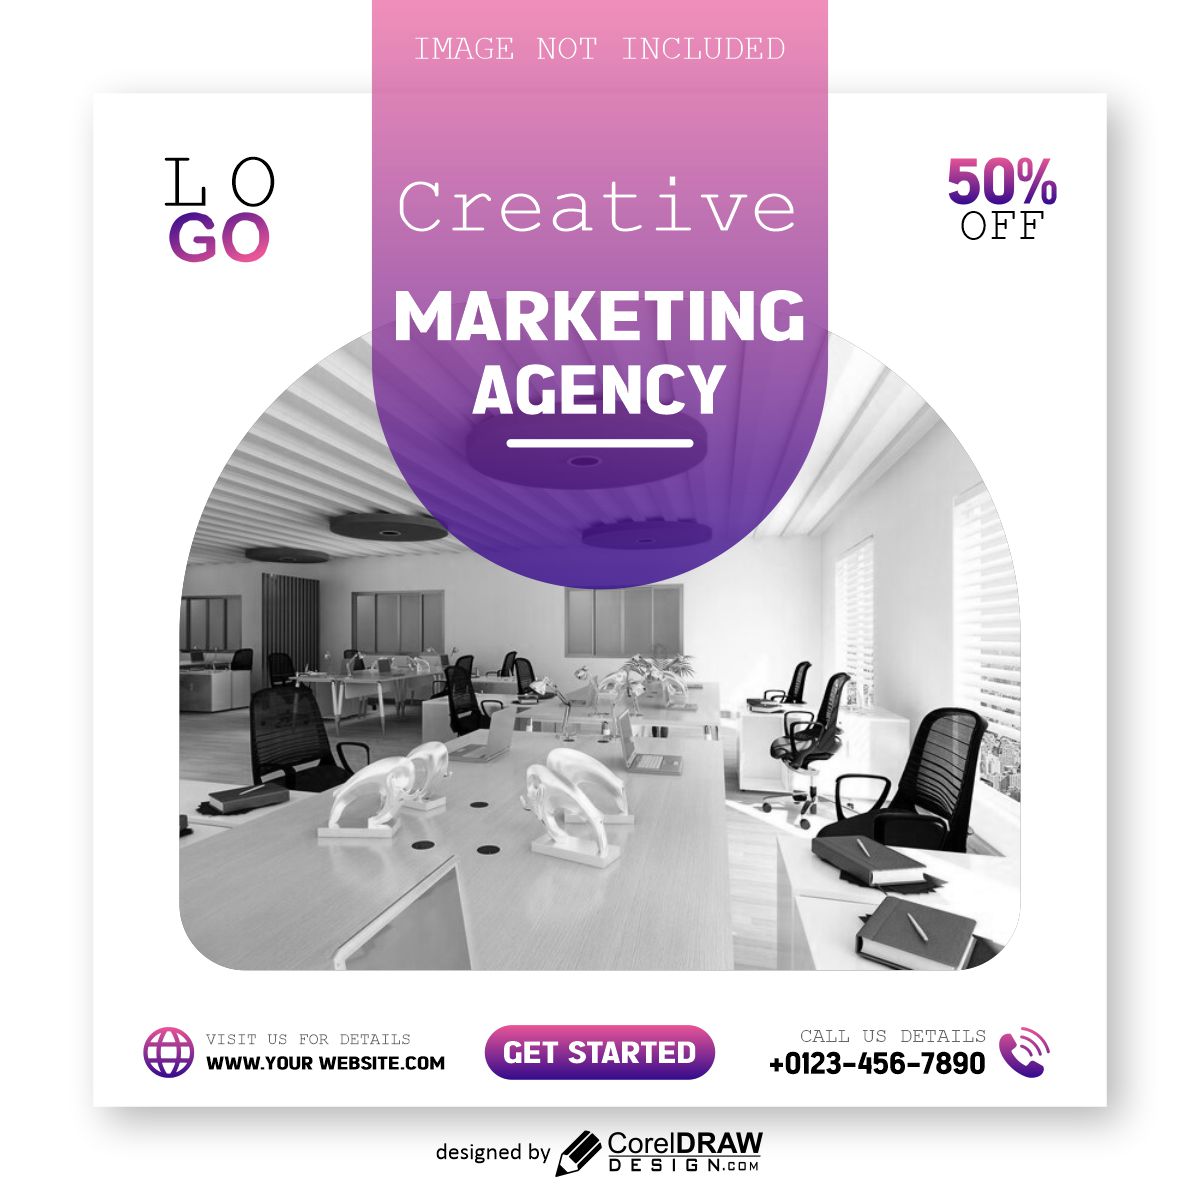 Creative Marking Agency poster vector design for free